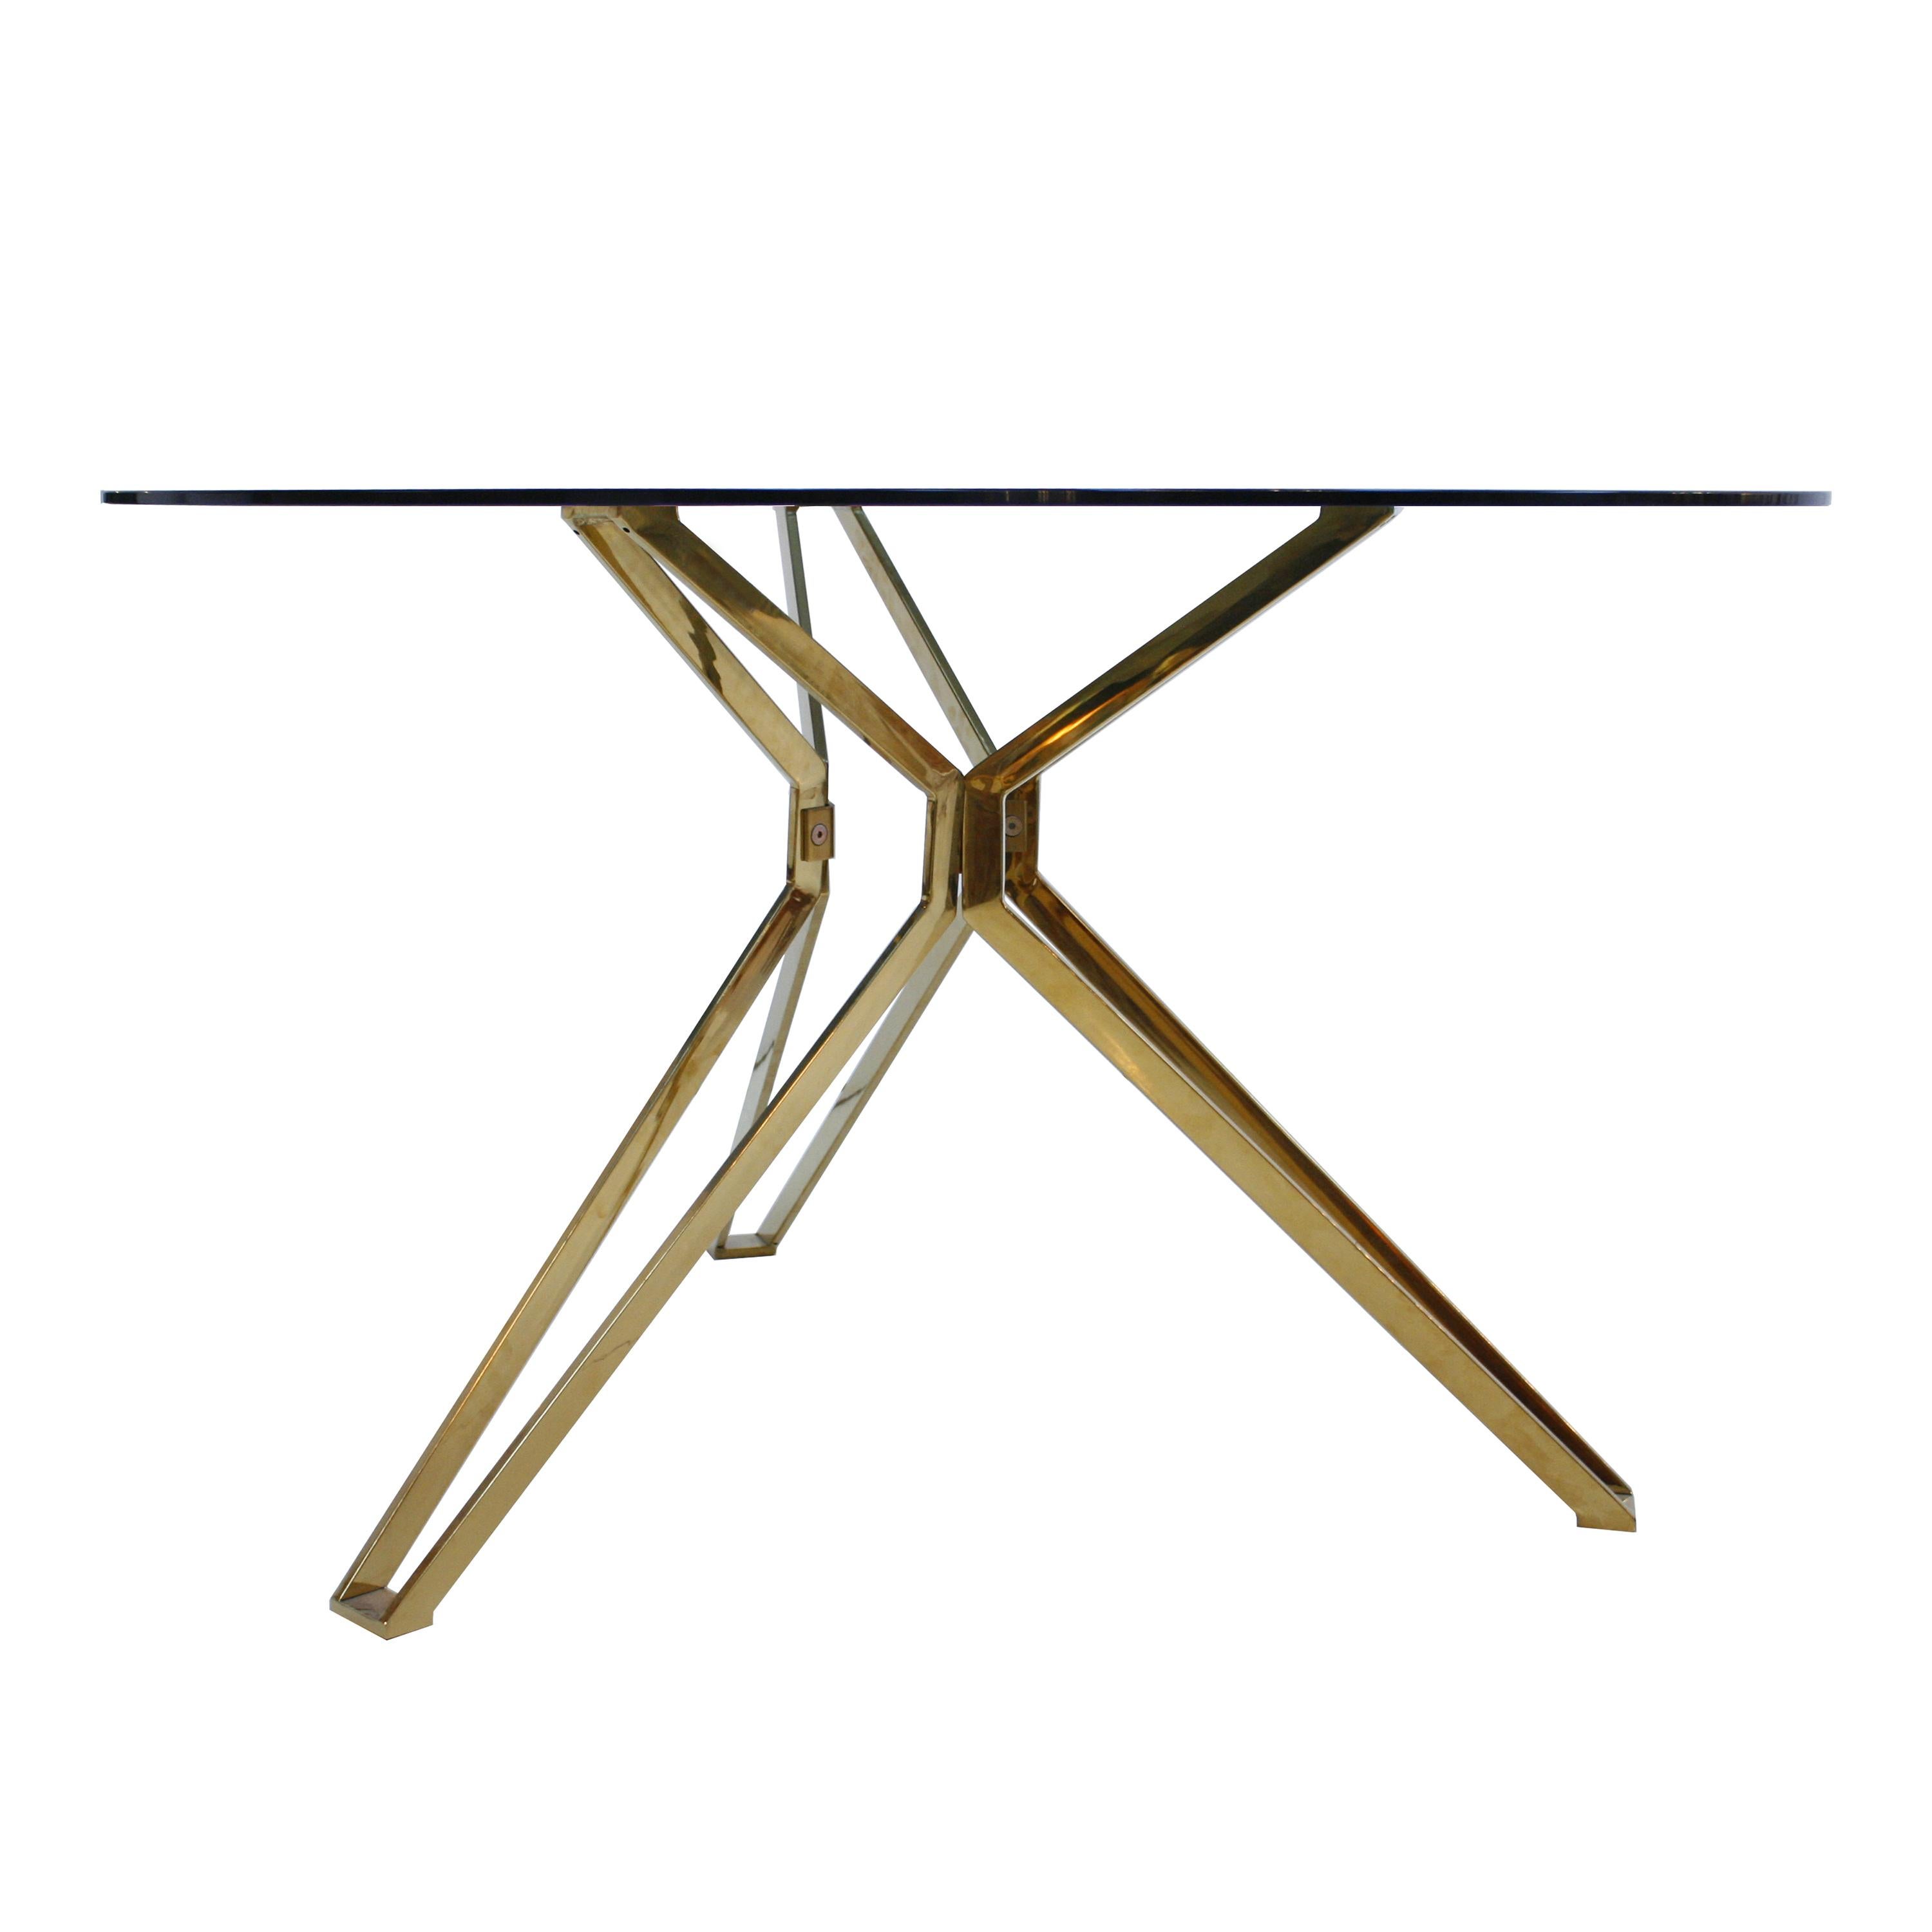 French contemporary dining table made with a sculptural brass base completed with a circular smoked glass top.